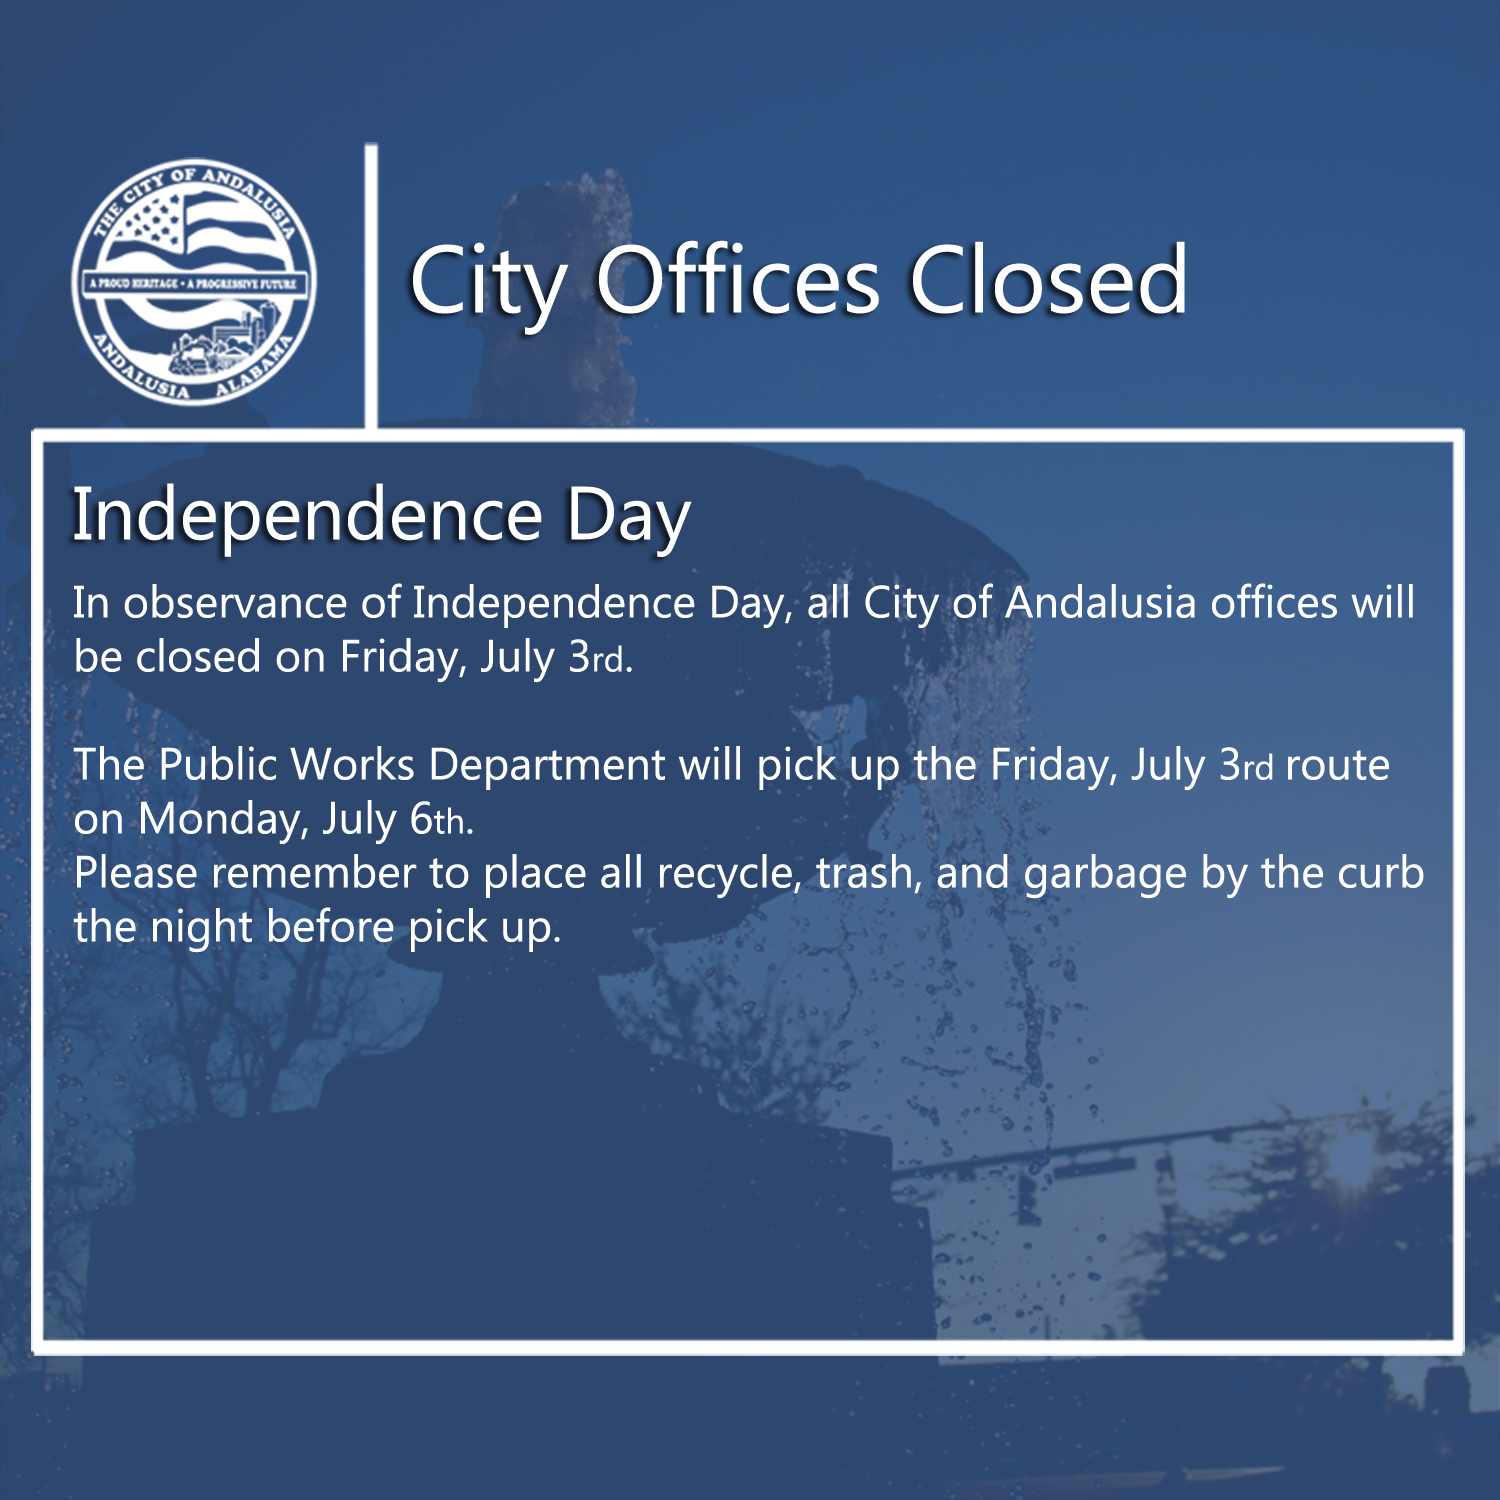 Facebook City Offices Closed July 3rd